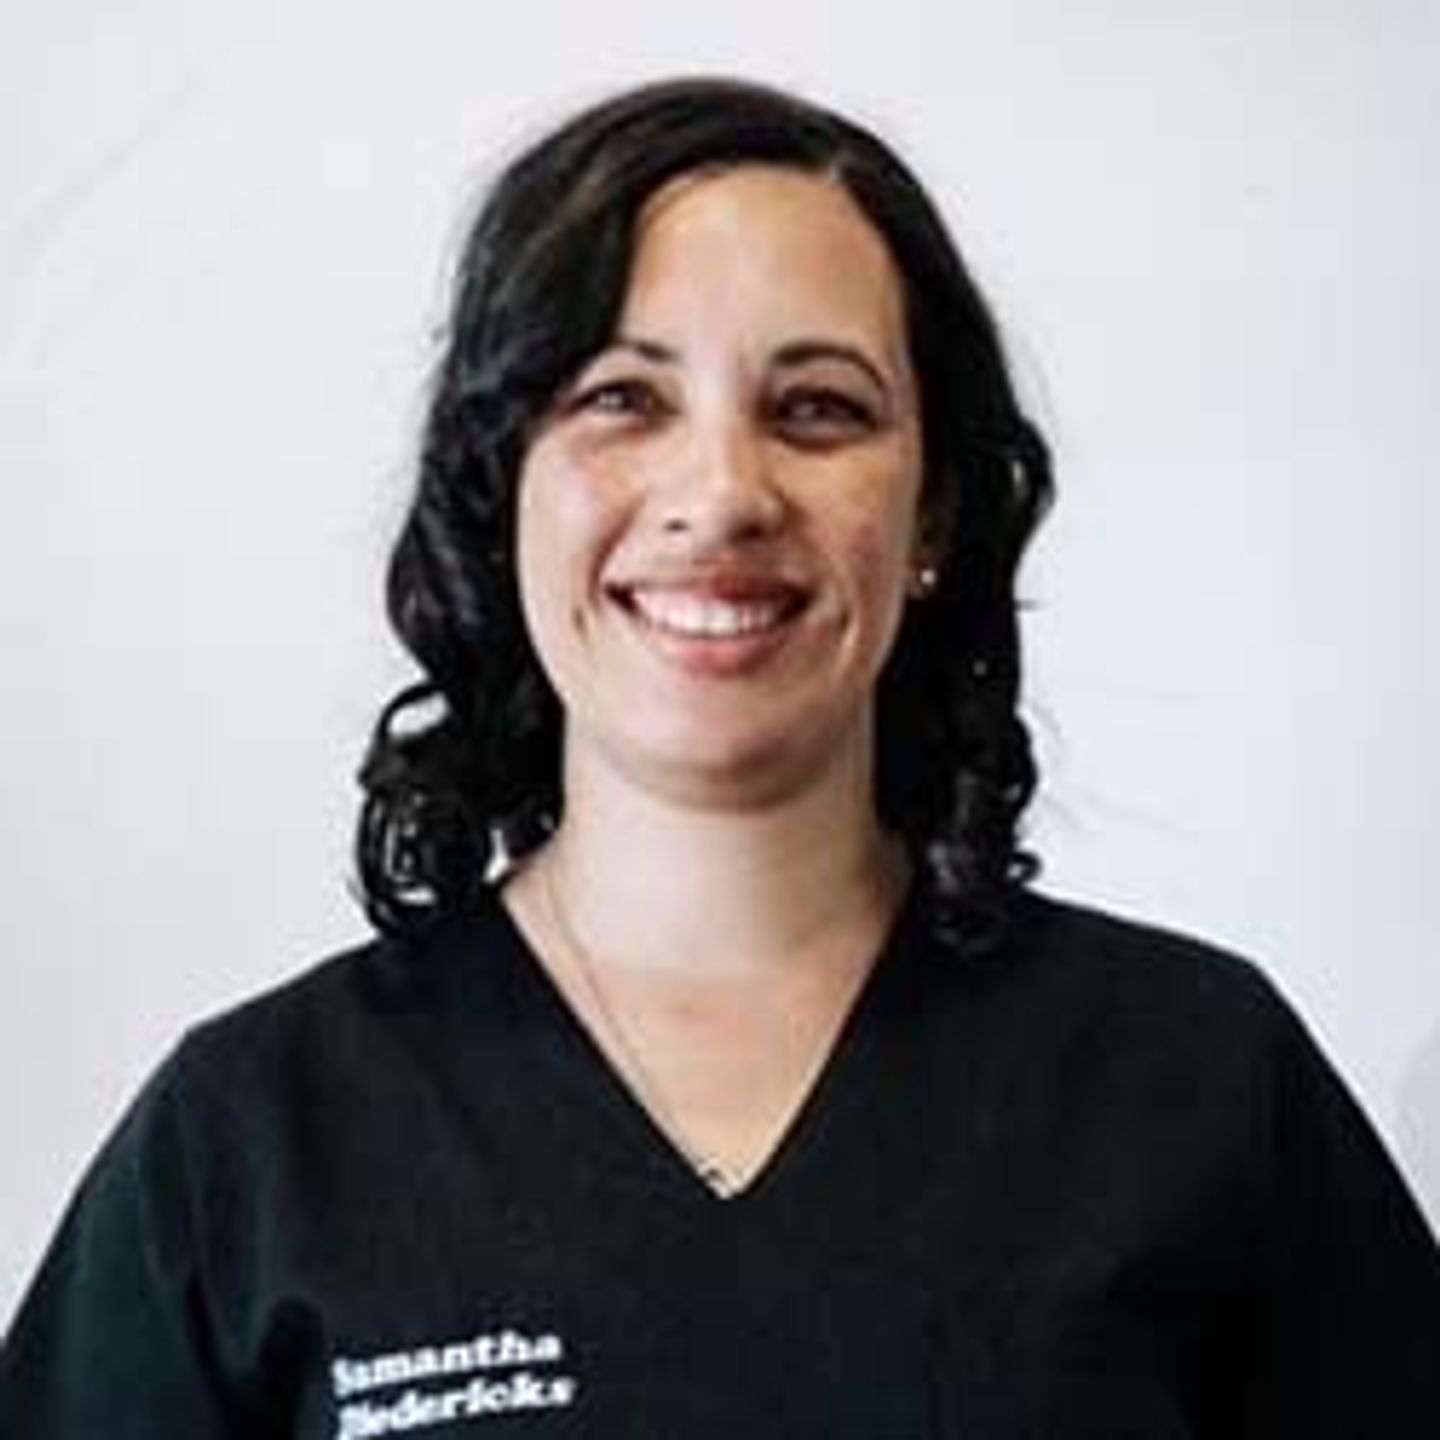 Samantha Diedericks, a cardiopulmonary physiotherapist working in both an inpatient and outpatient setting in Cape Town, South Africa